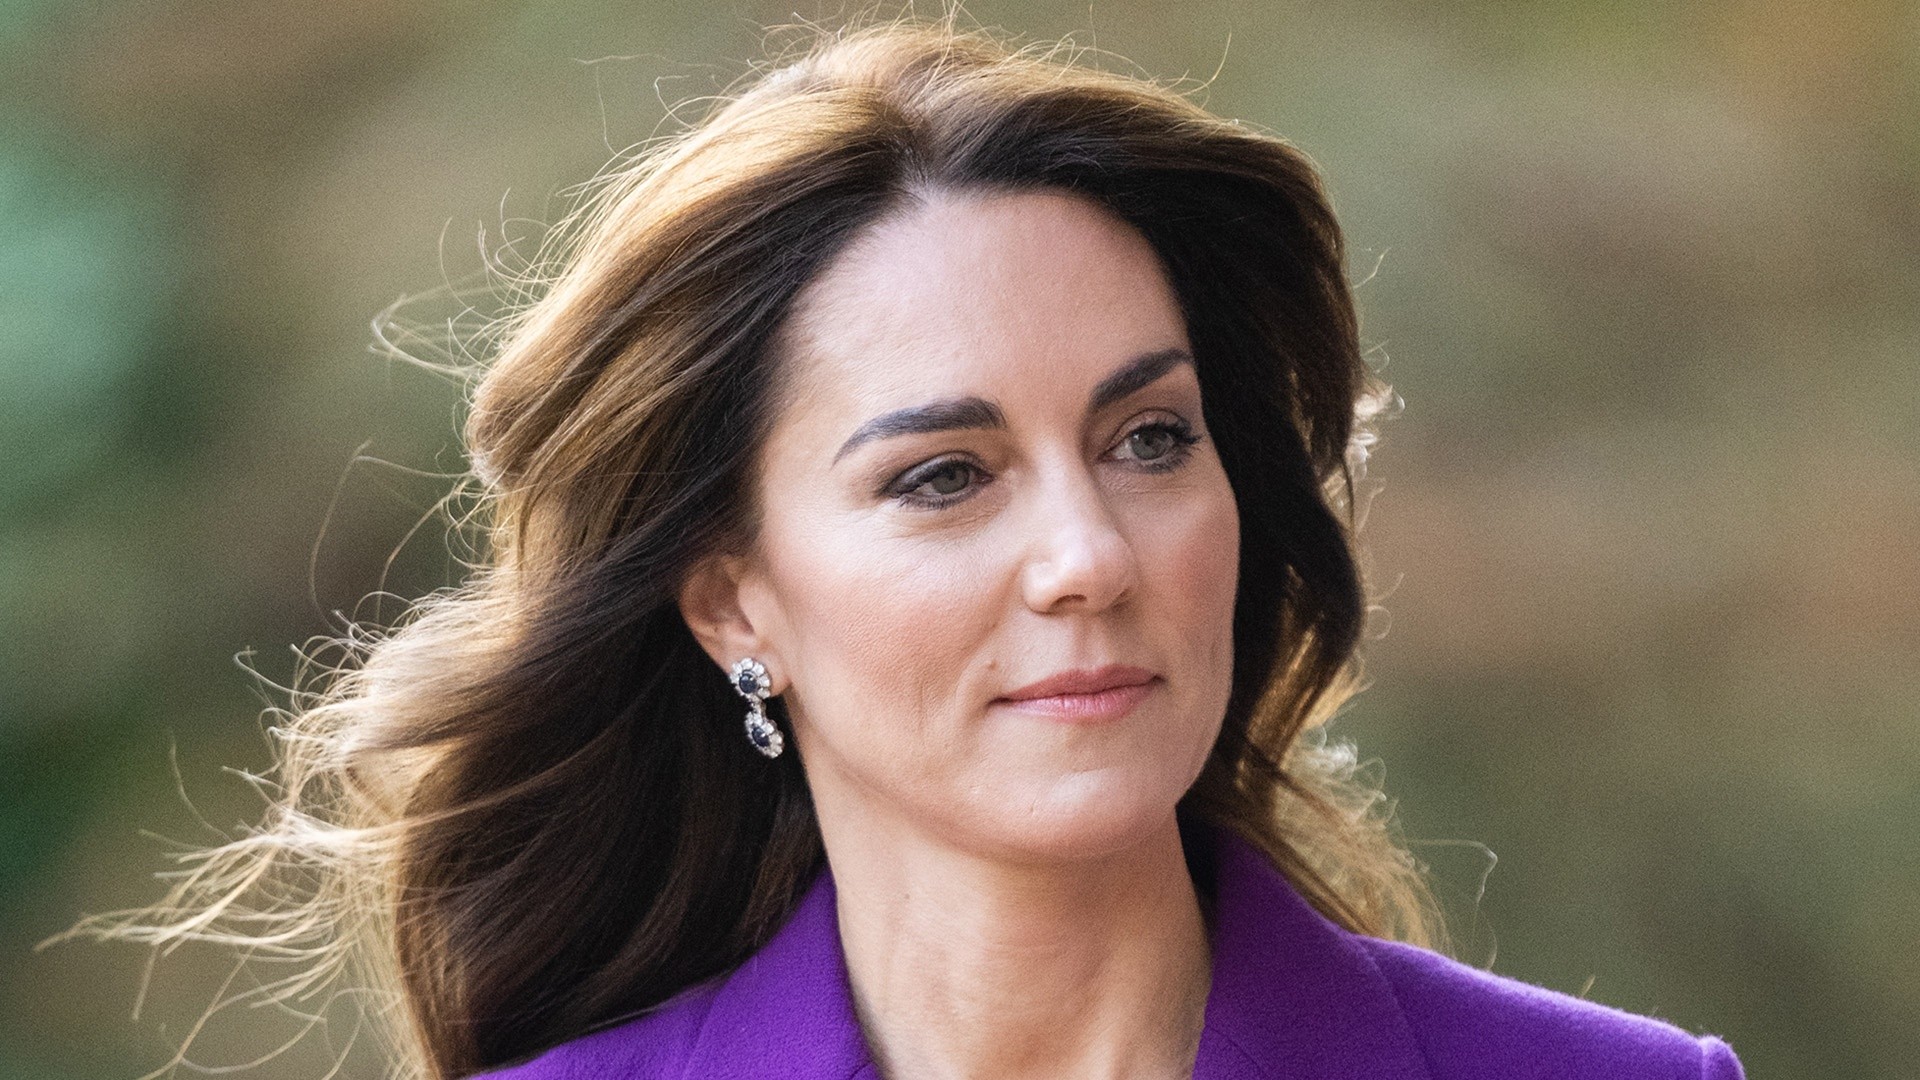 Kate Middleton's cancer puts focus on preventative chemotherapy